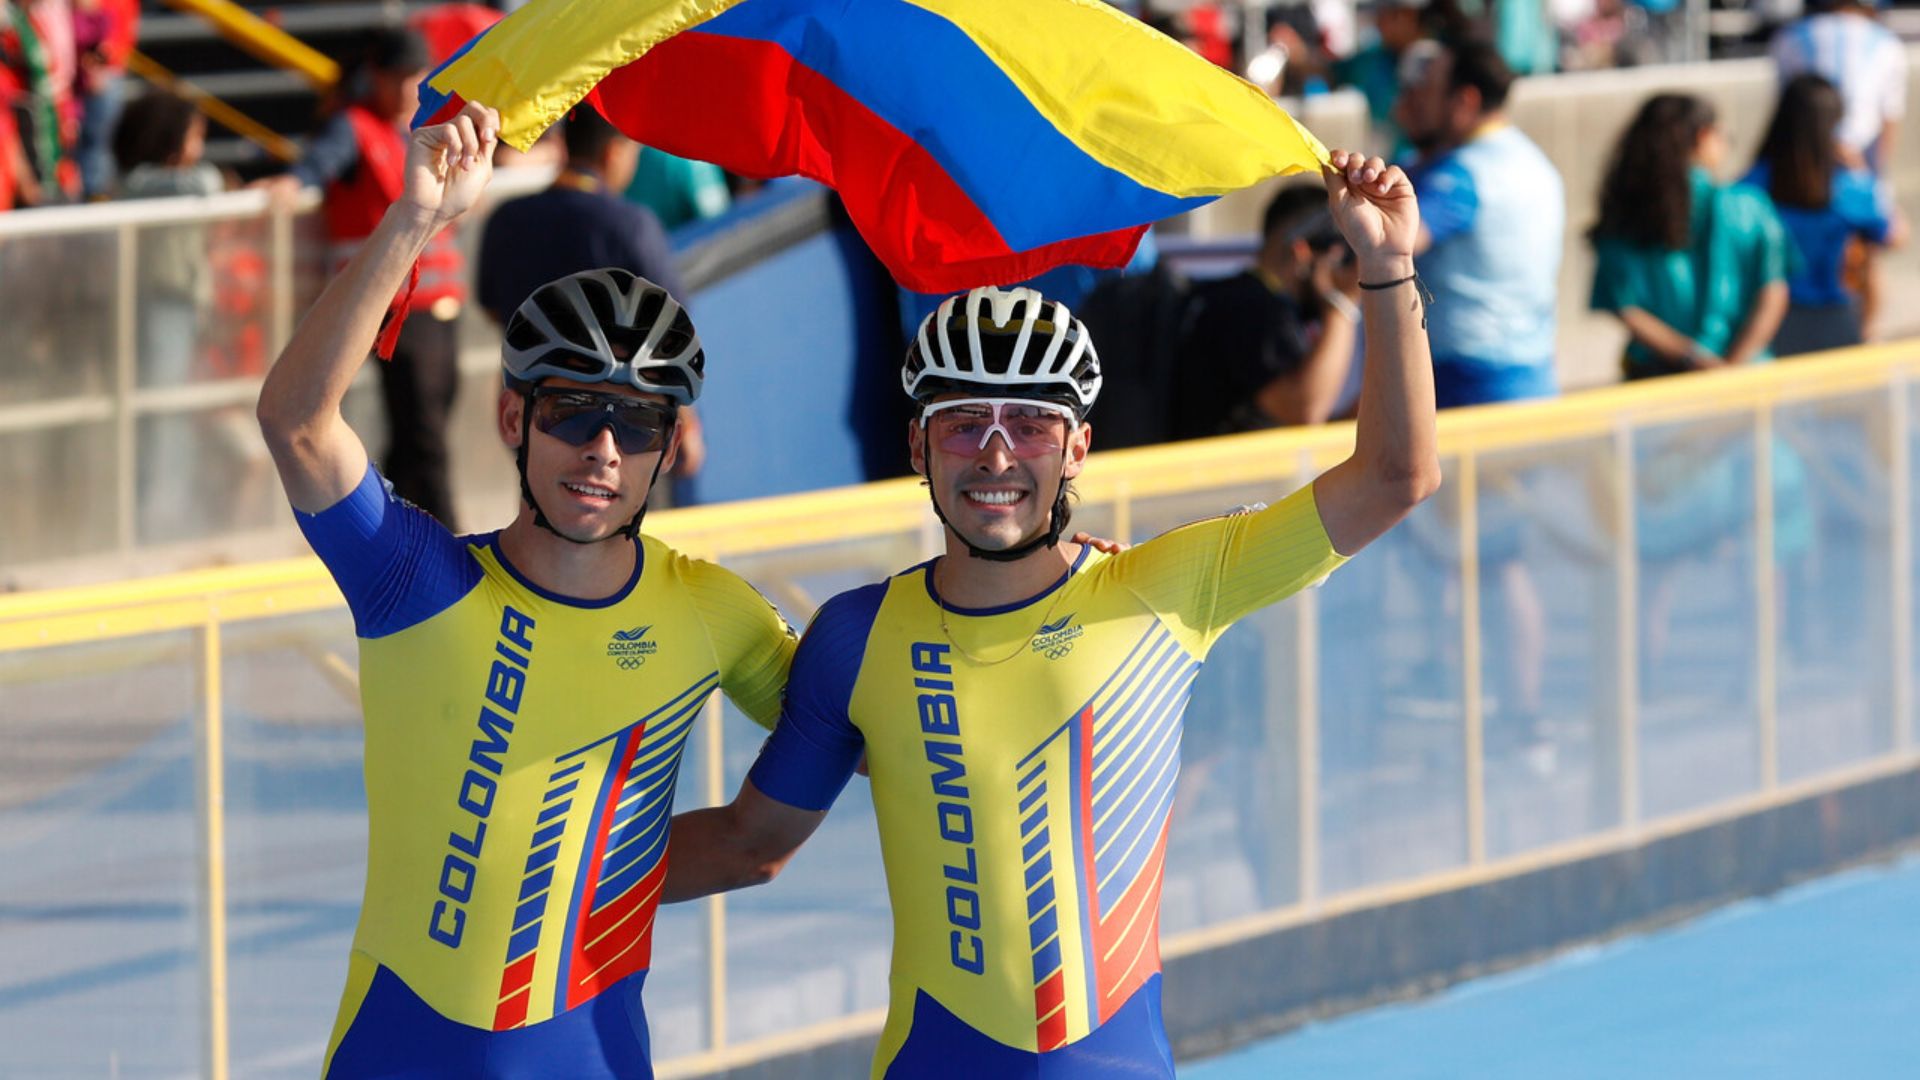 Gold and Silver for Colombia in the Male's 1000-Meter Sprint